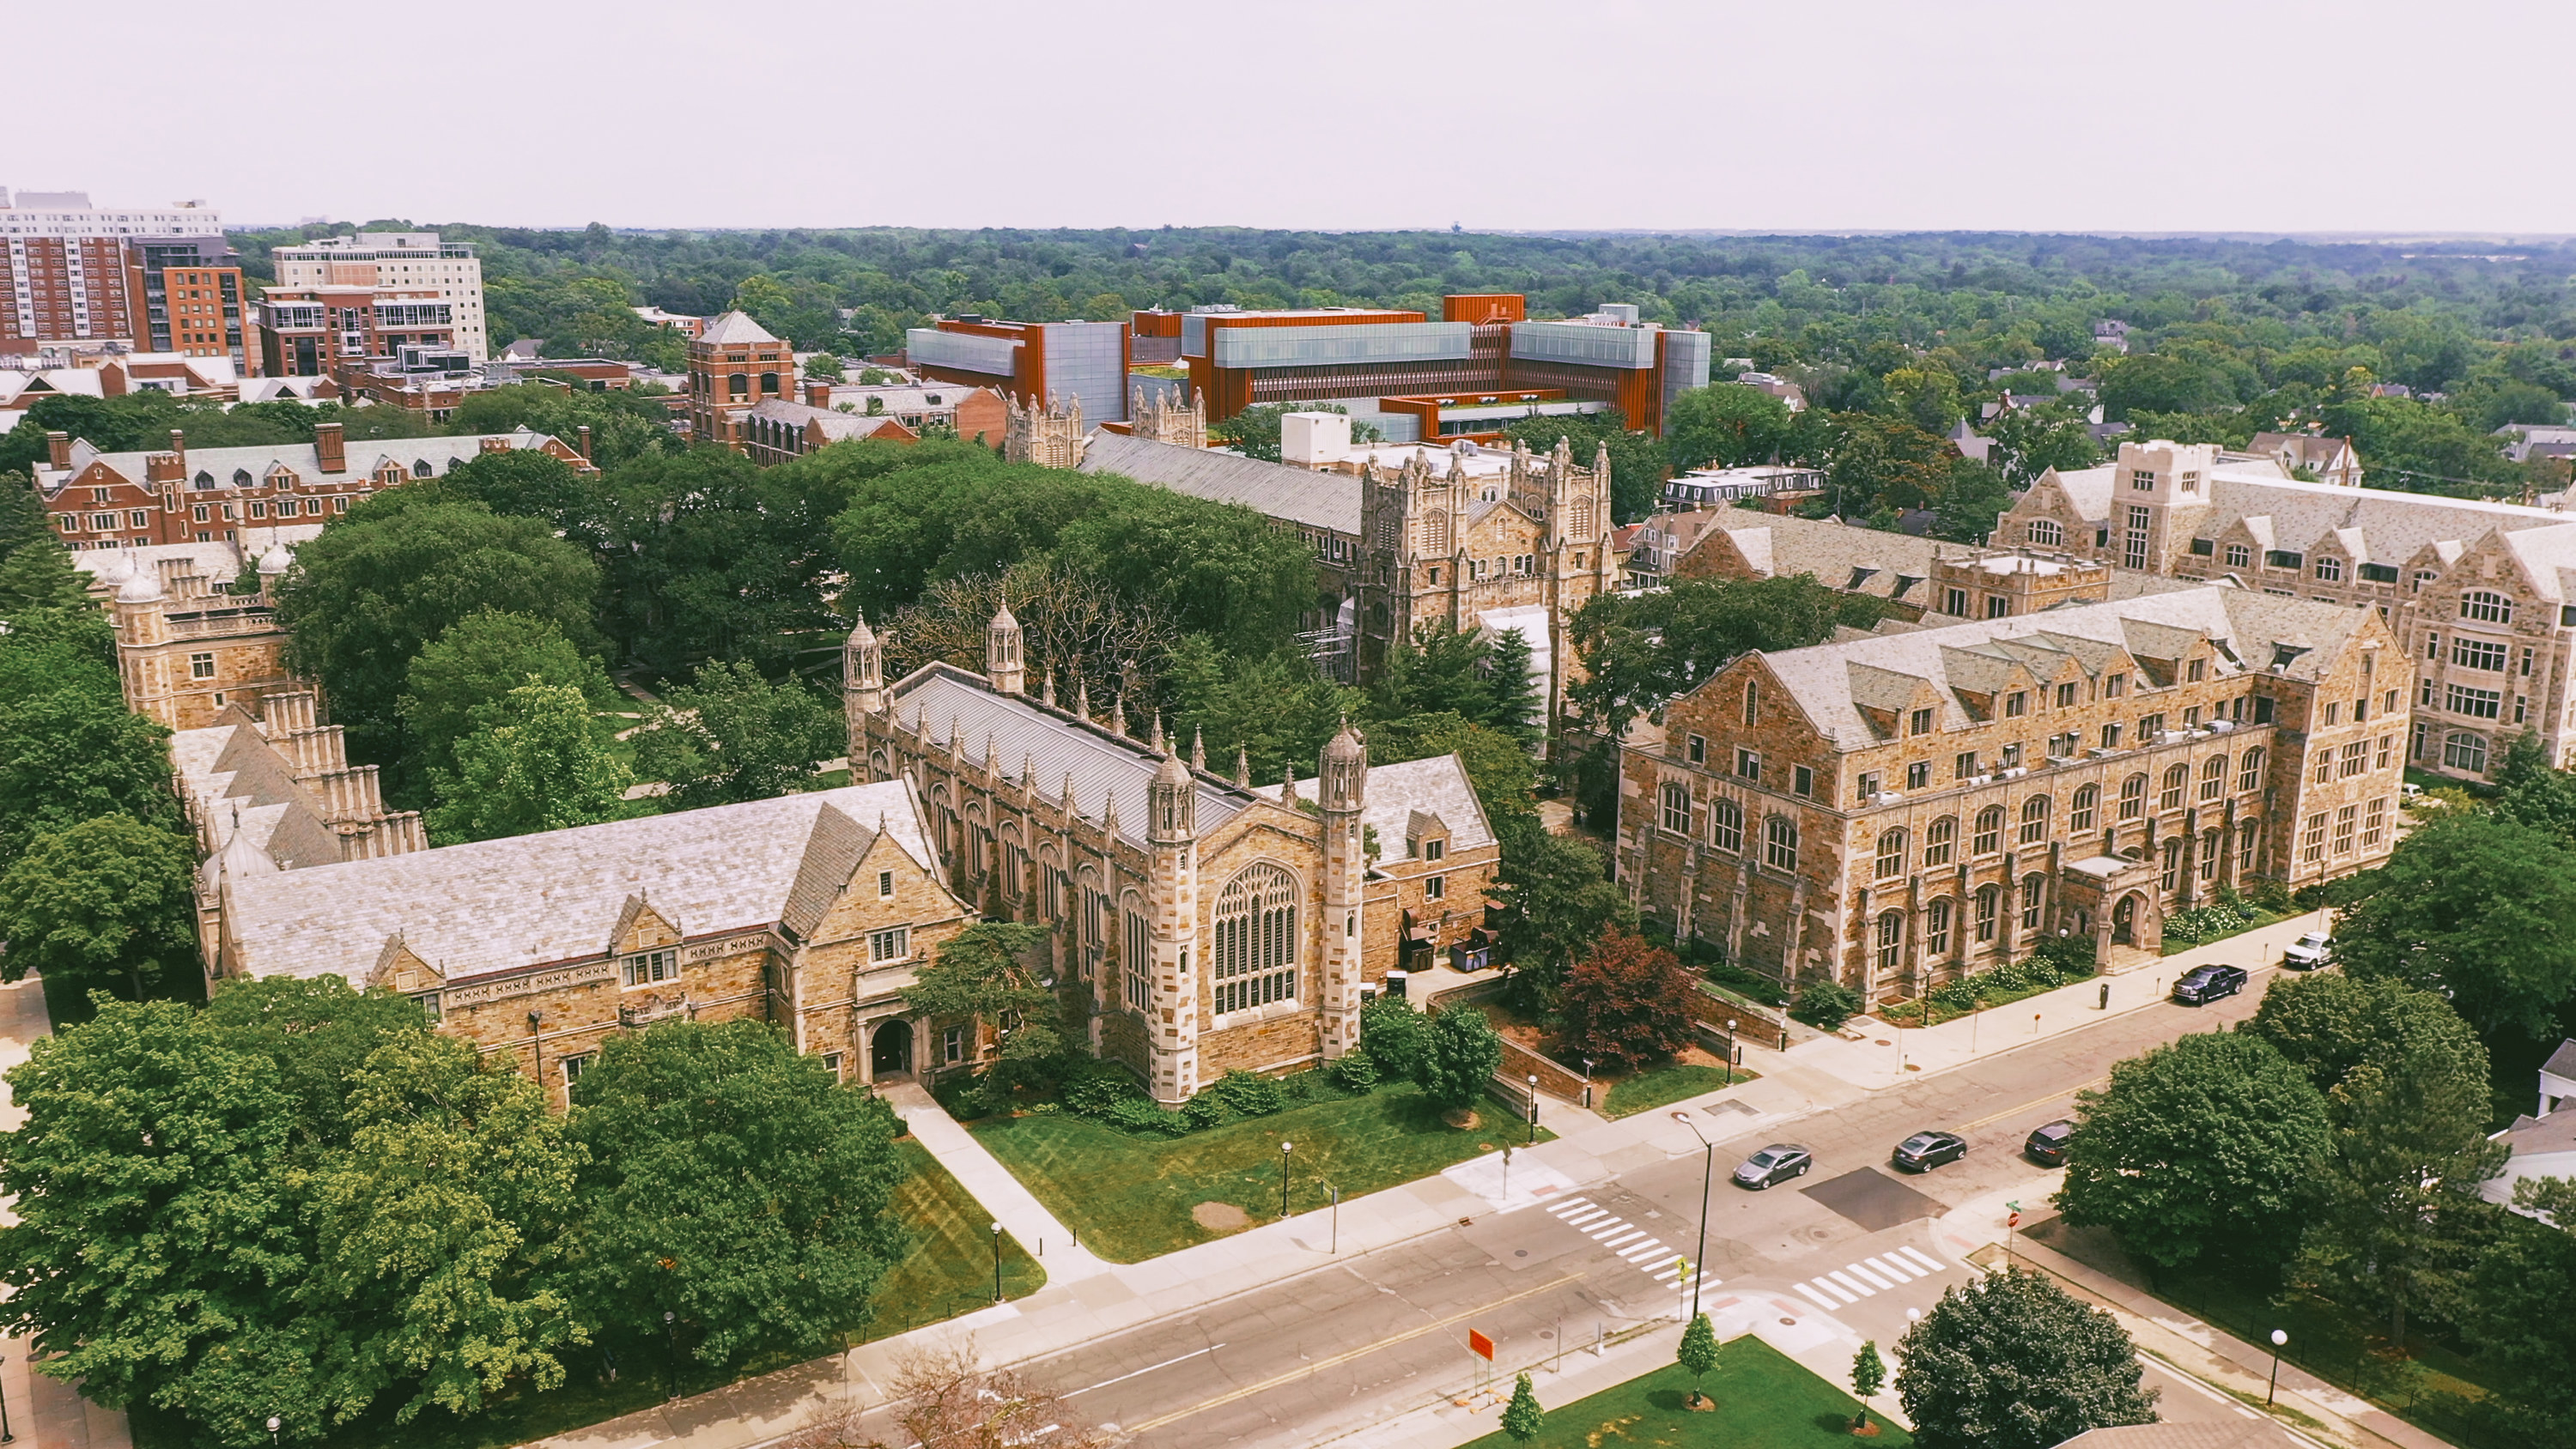 An aerial view of a college campus